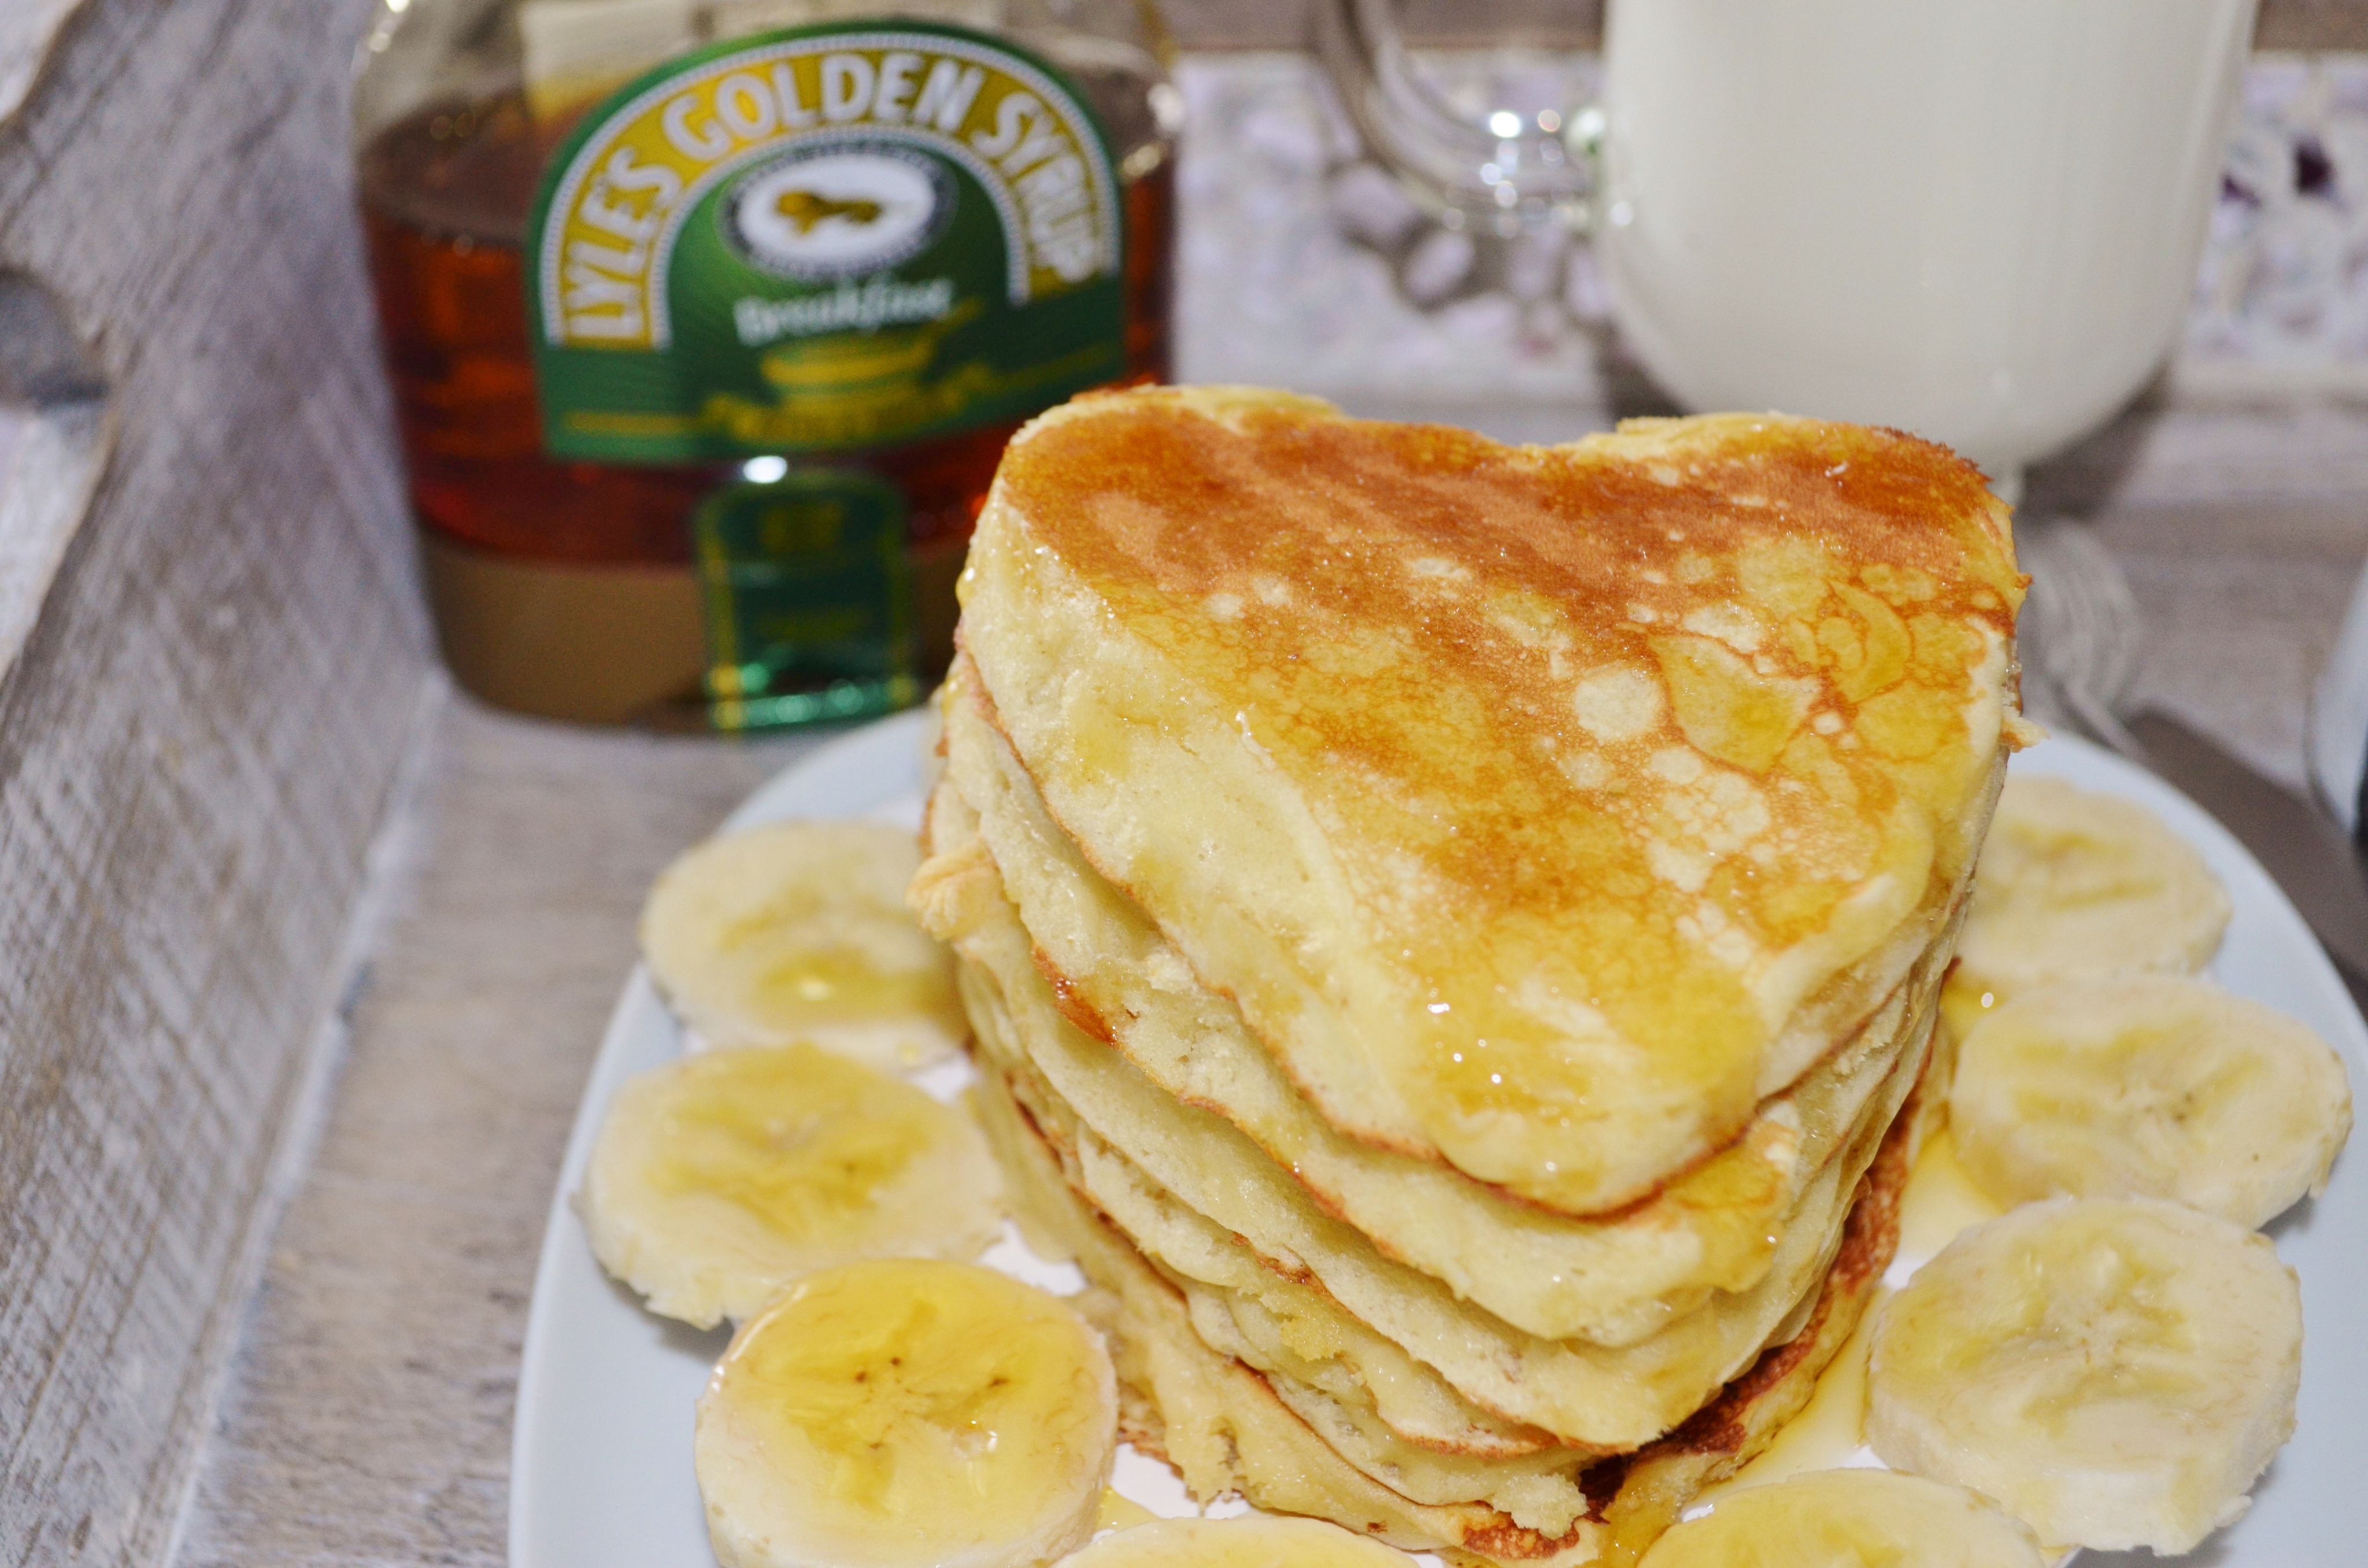 American breakfast: pancakes with Golden Syrup!